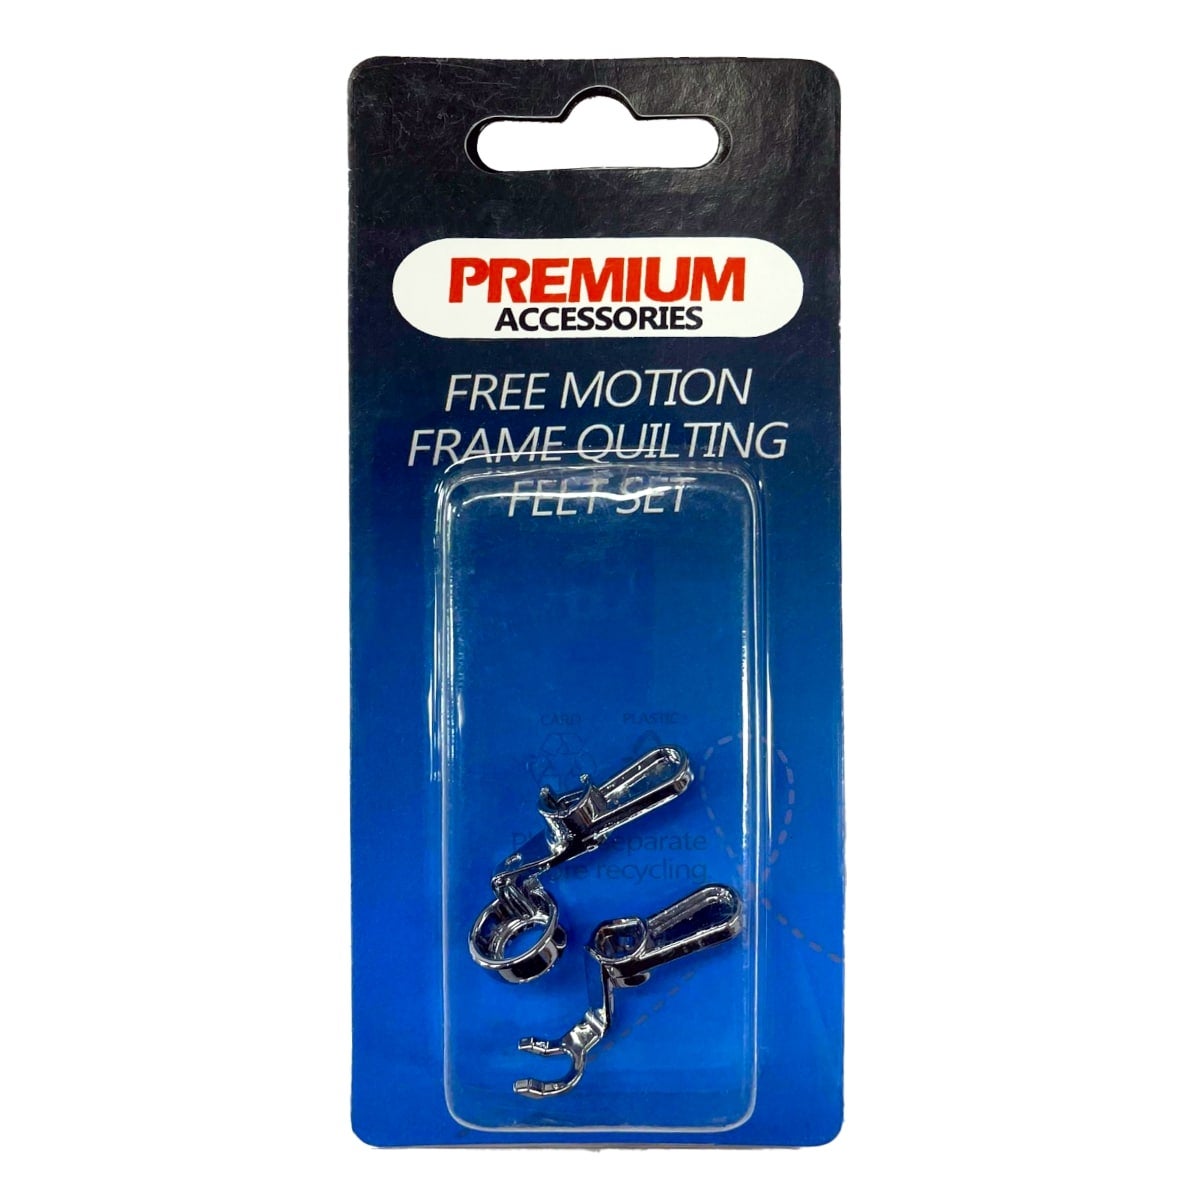 Premium Free Motion Frame Quilting Feet Set for Janome Sewing Machine Models